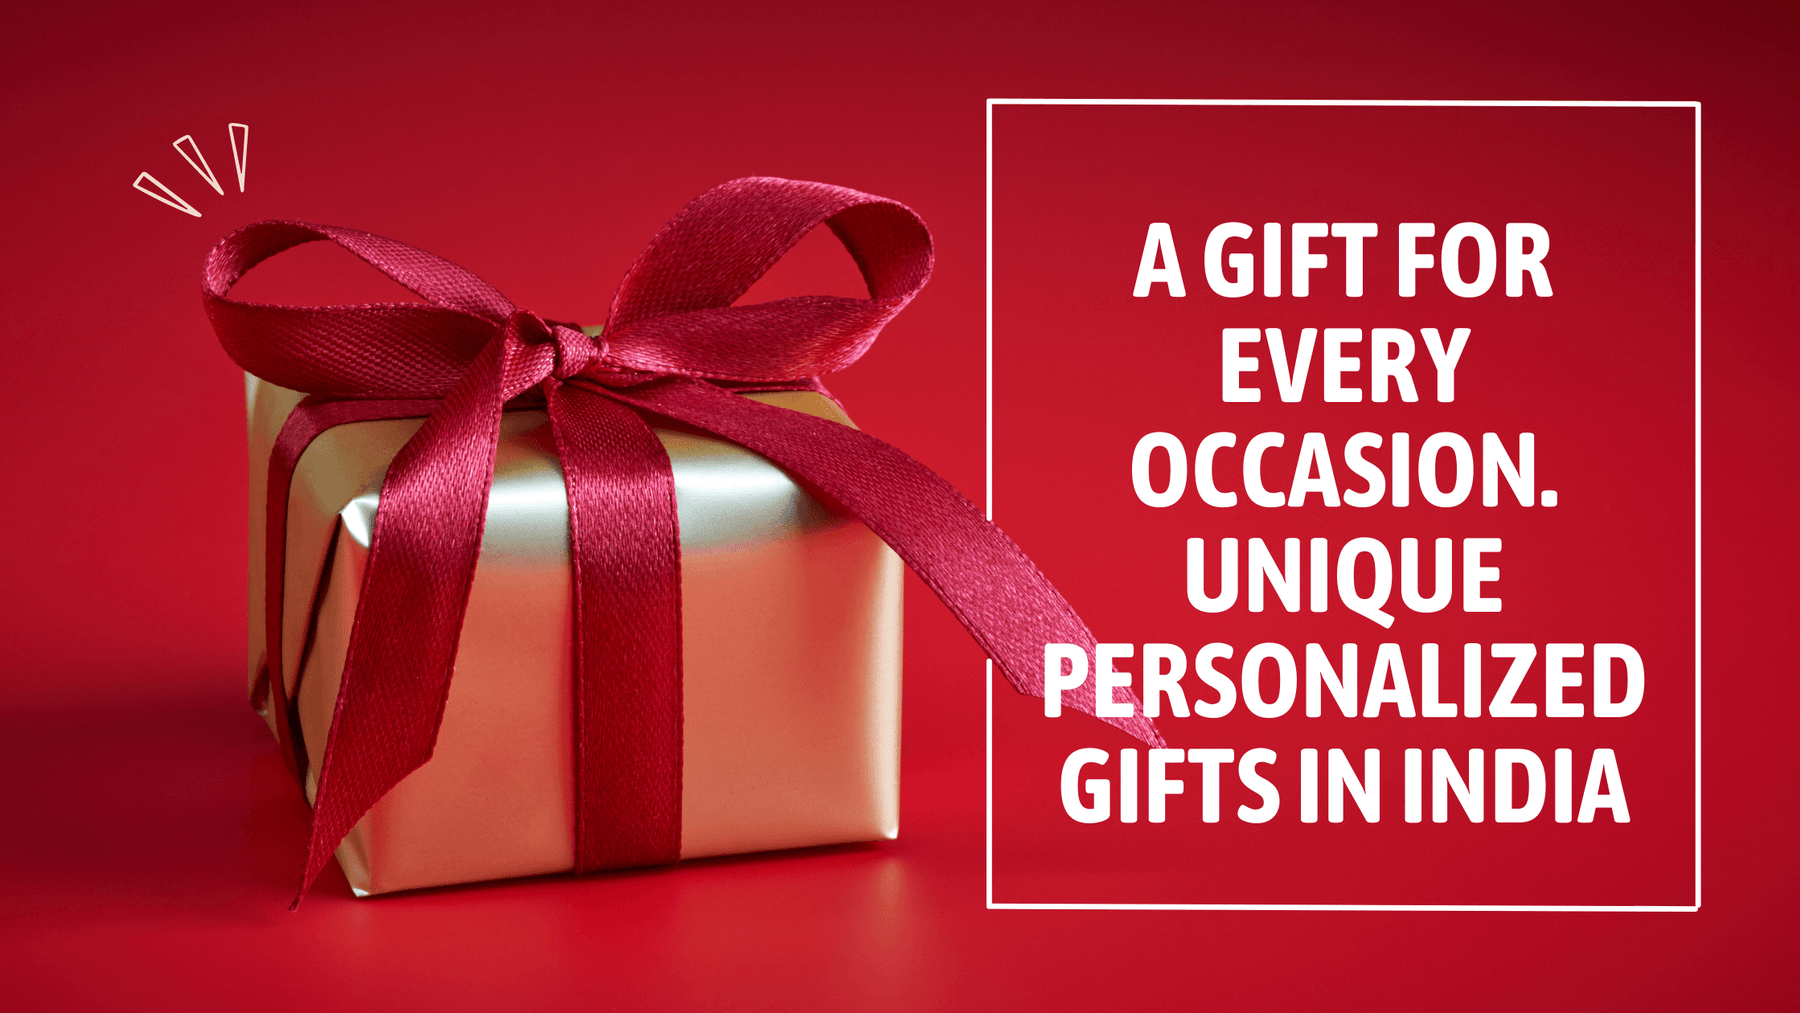 A Gift for Every Occasion. Unique Personalized Gifts in India